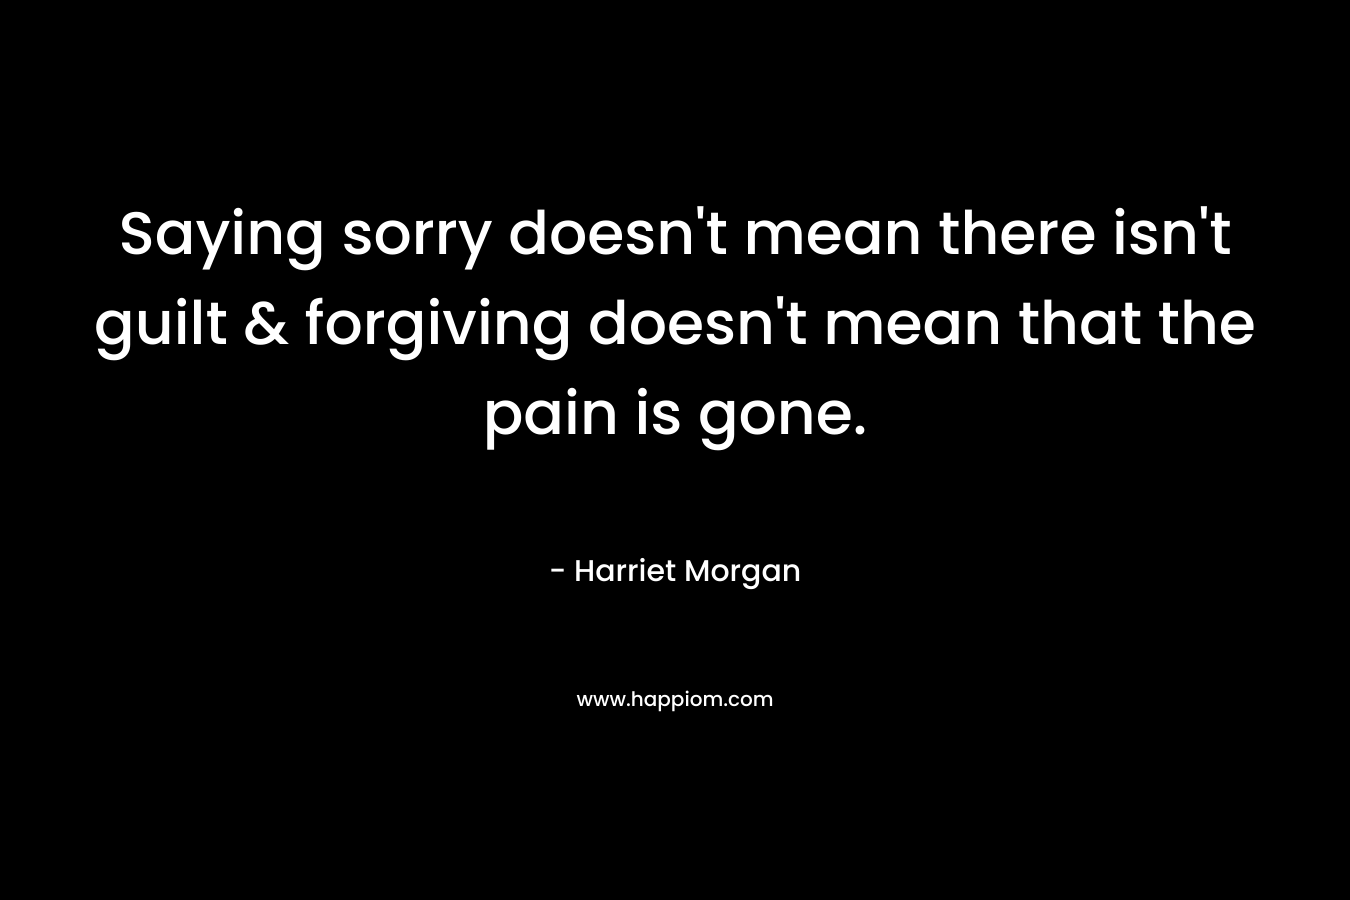 Saying sorry doesn’t mean there isn’t guilt & forgiving doesn’t mean that the pain is gone. – Harriet Morgan